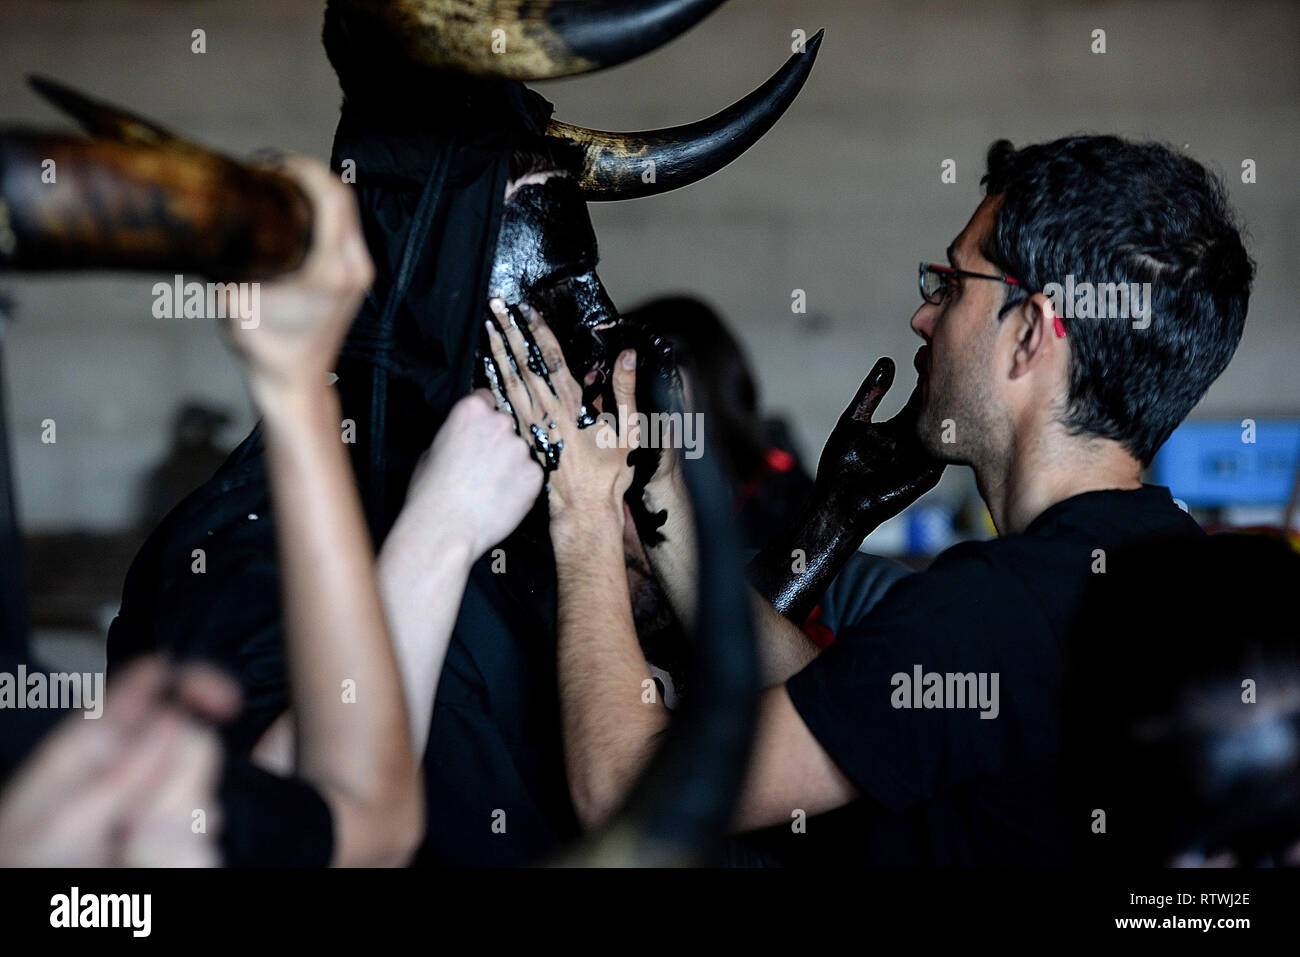 A reveller seen being dressed in oil, bull horns and cowbells to represent the devil, during a traditional carnival celebration in the small village of Luzon, Spain. Preserved records from the 14th century document Luzon's carnival, but the real origin of the tradition could be much older. Carnival festivals are celebrated in their own way around hundreds of villages in Spain. Stock Photo